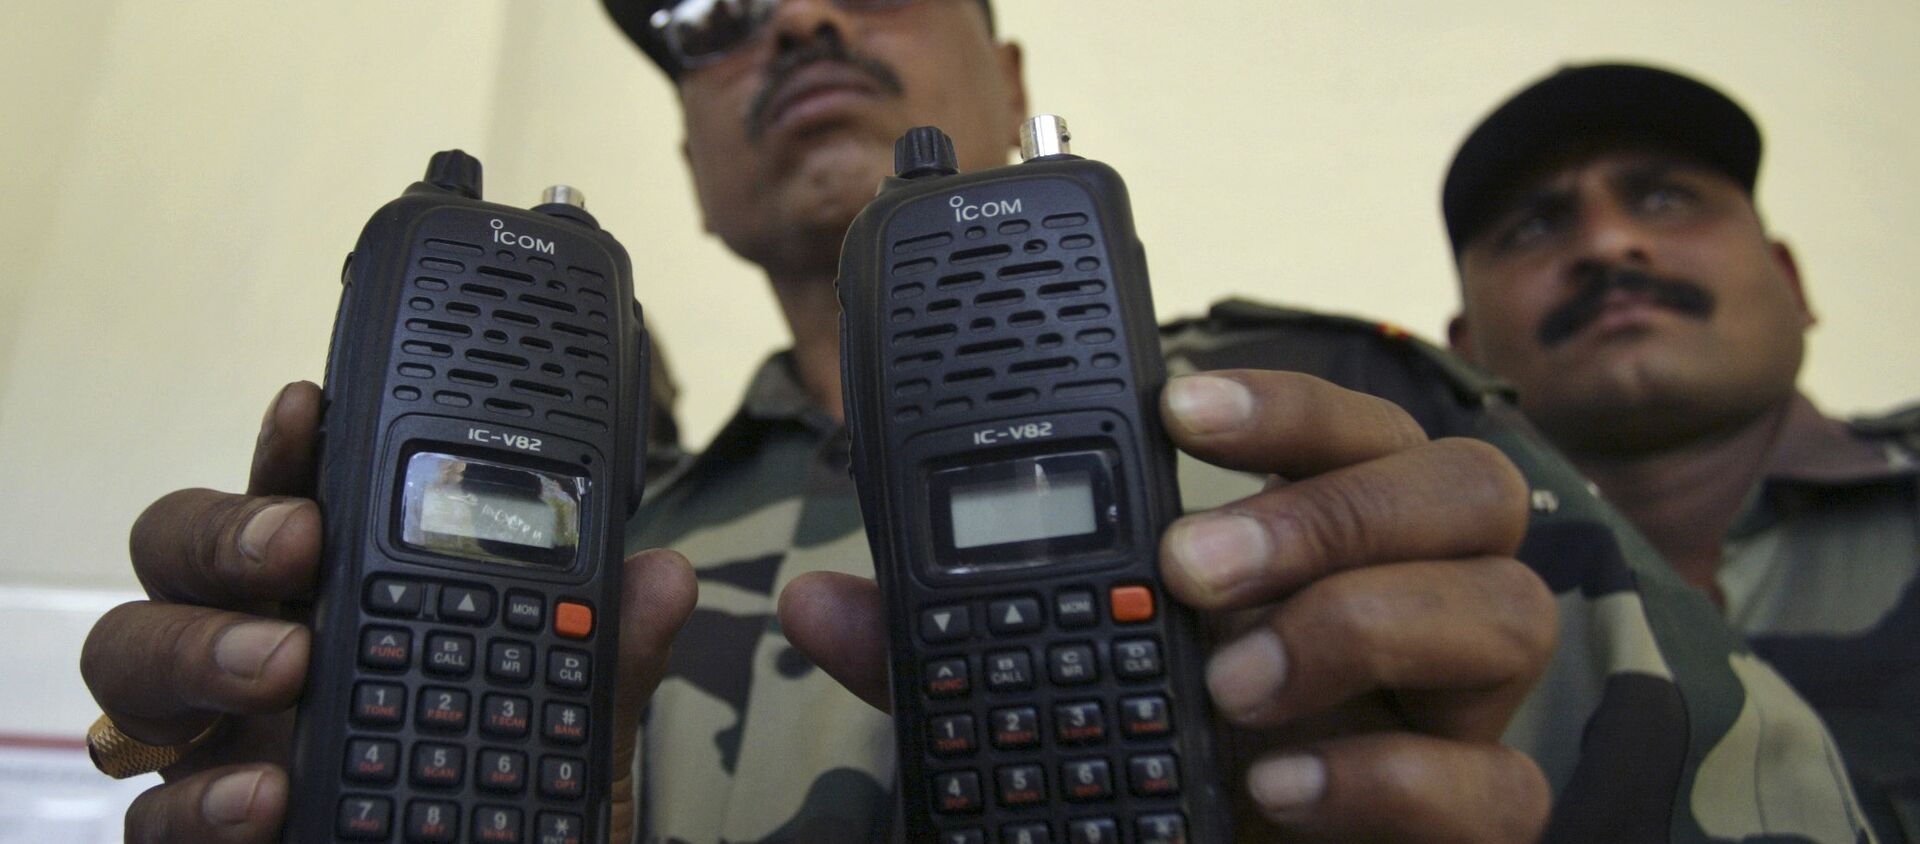 An Indian army officer displays satellite phones at Nagrota military station on the outskirts of Jammu, India, Monday, March 29, 2010 - Sputnik International, 1920, 30.10.2020